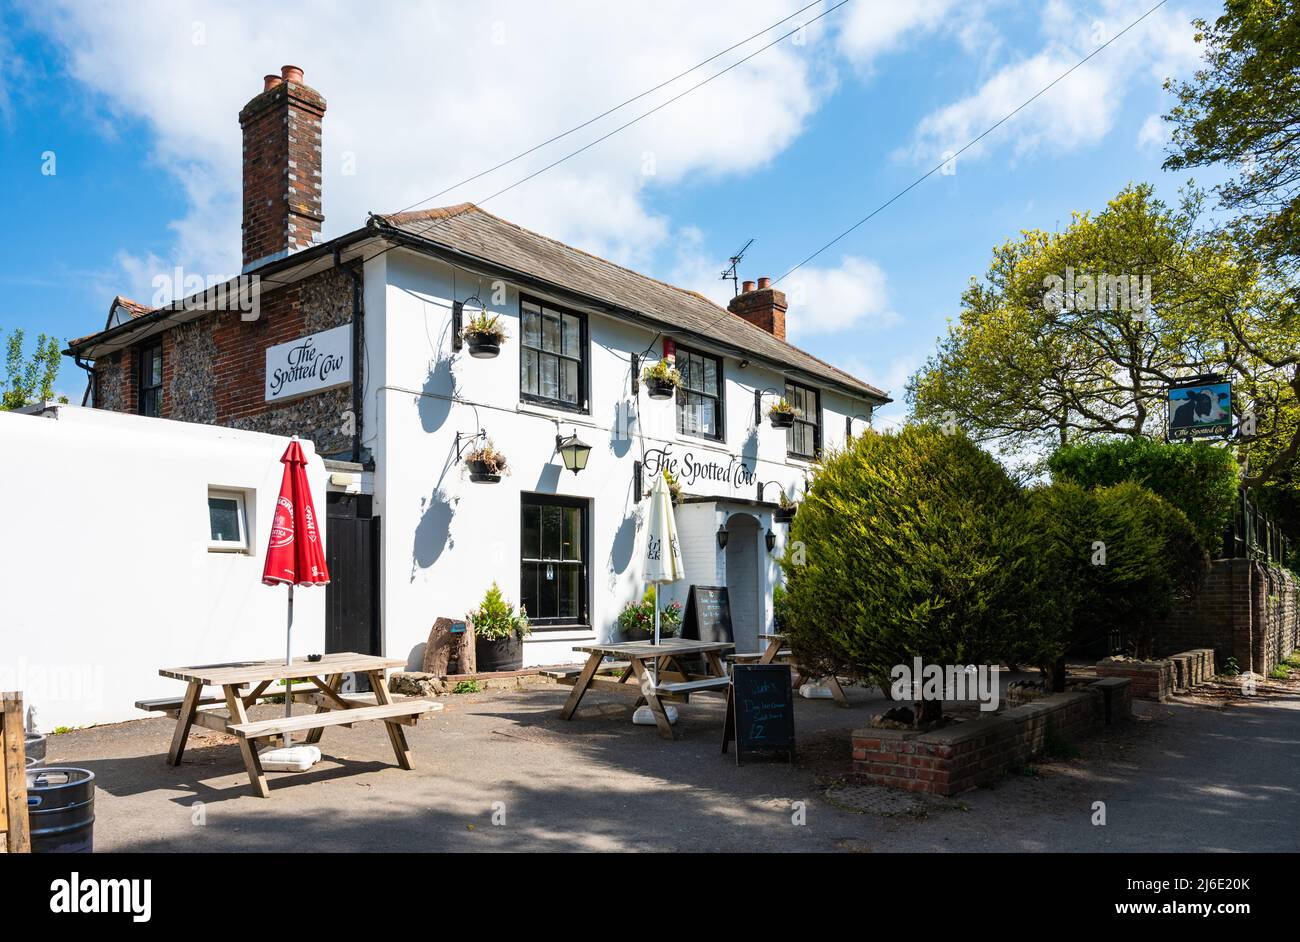 The Spotted Cow traditional village pub in Angmering, West Sussex, England, UK. Stock Photo